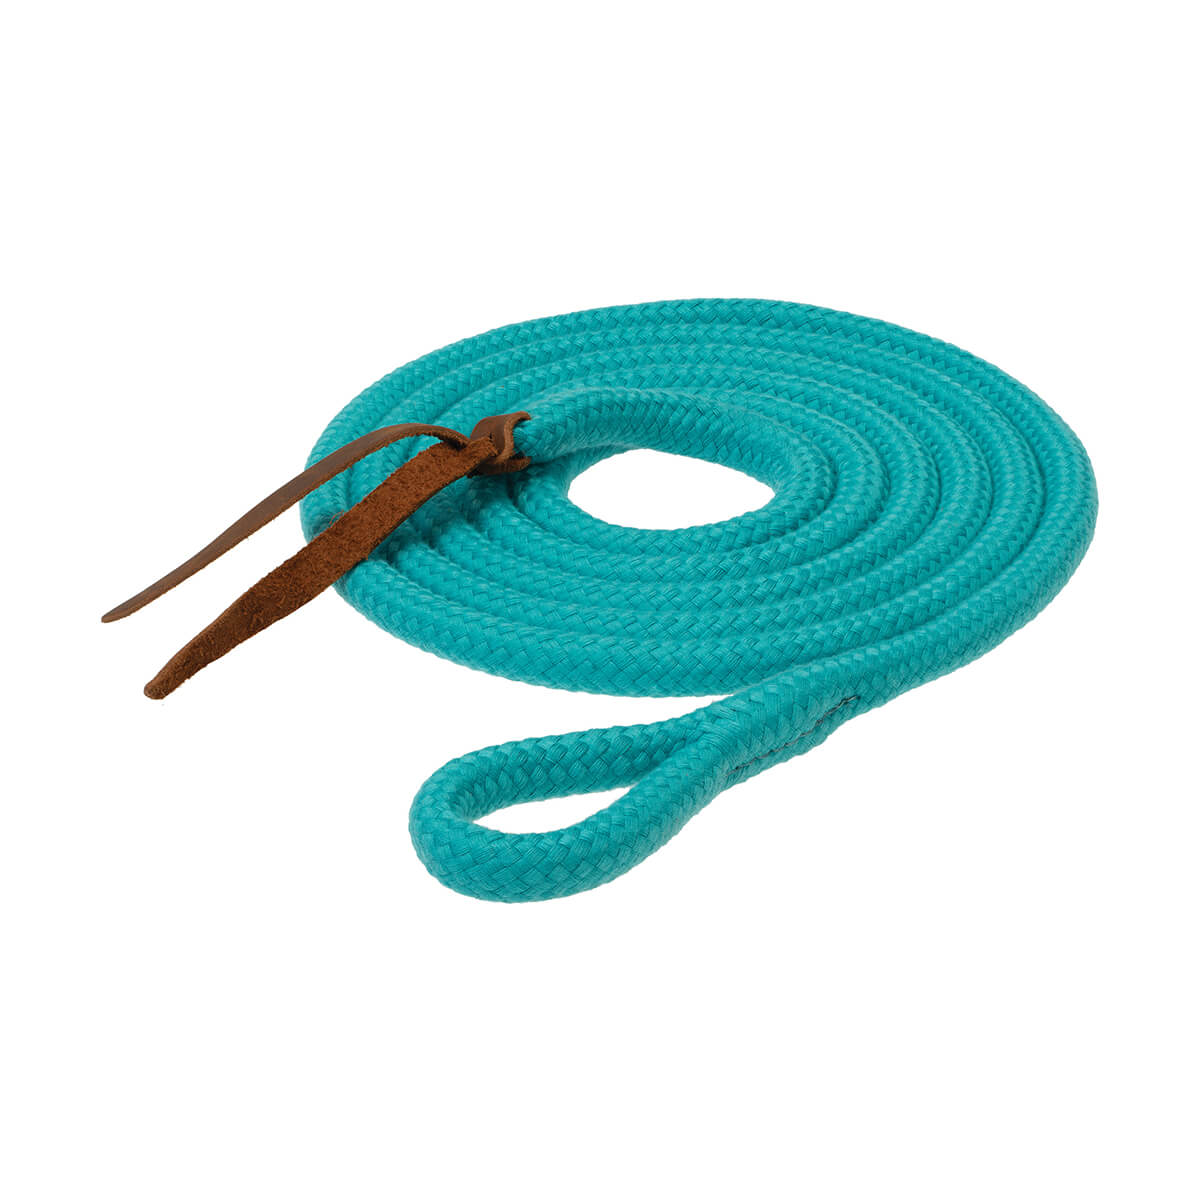 Pima Cotton Lead Turquoise - 5/8-in x 10-ft